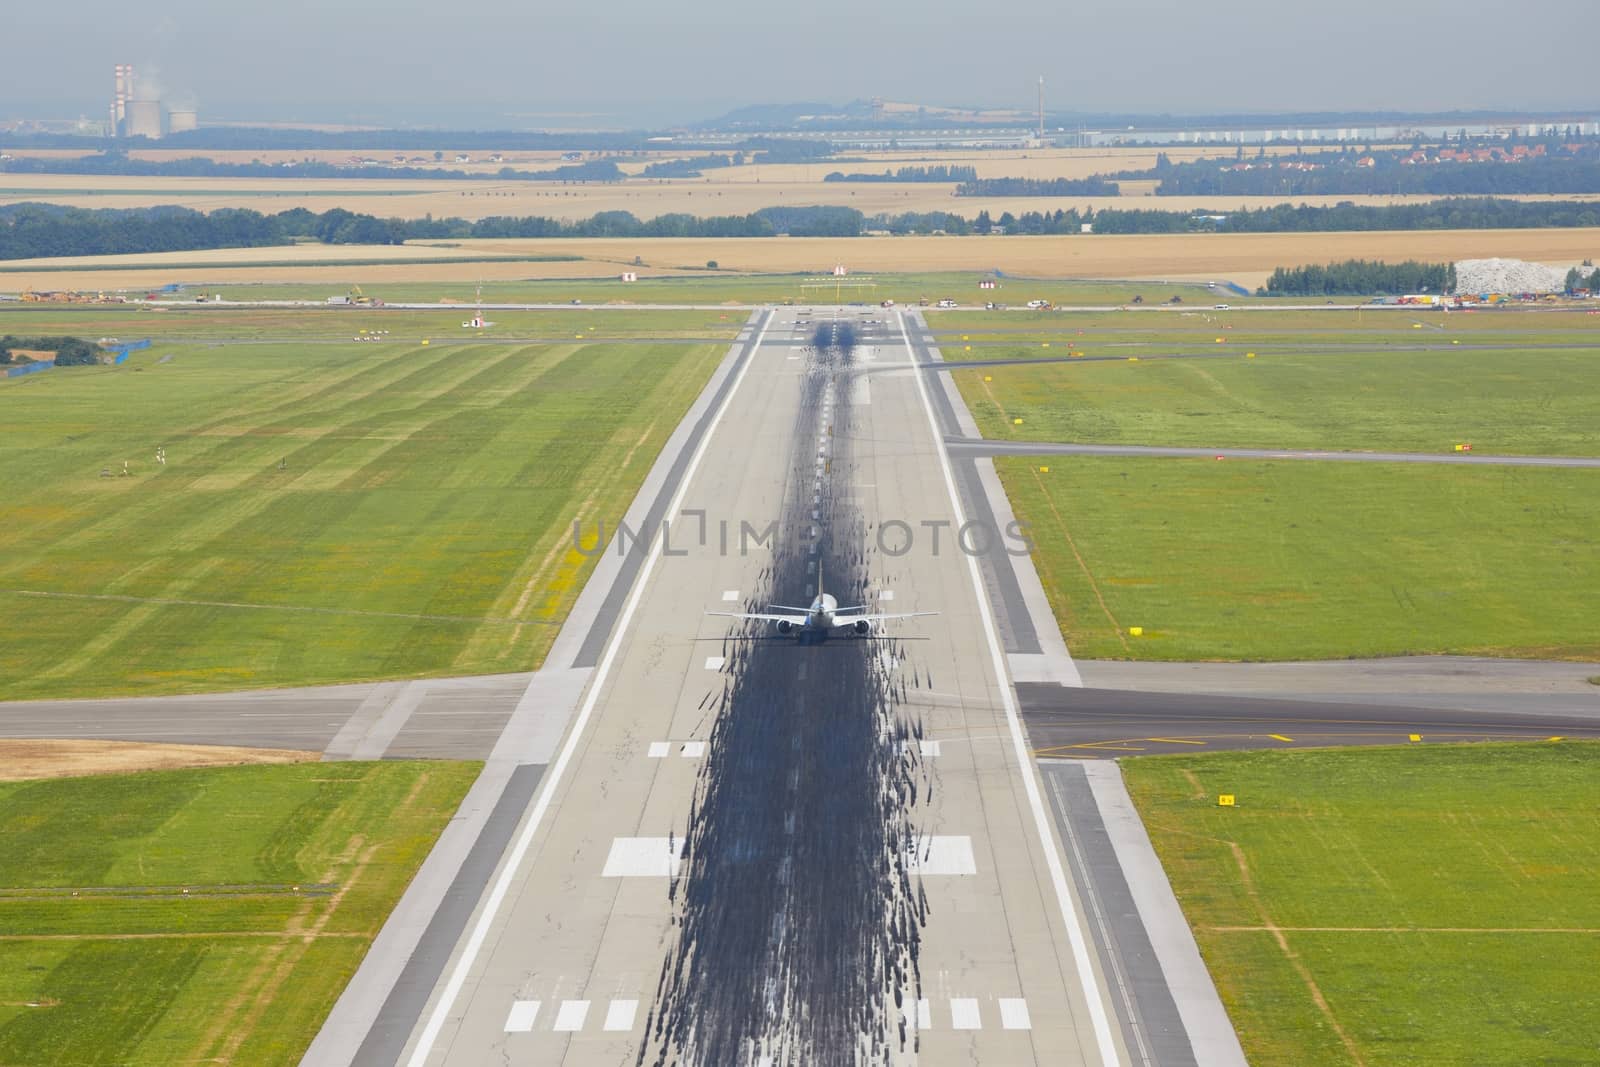 Marking on the beginning of the long runway